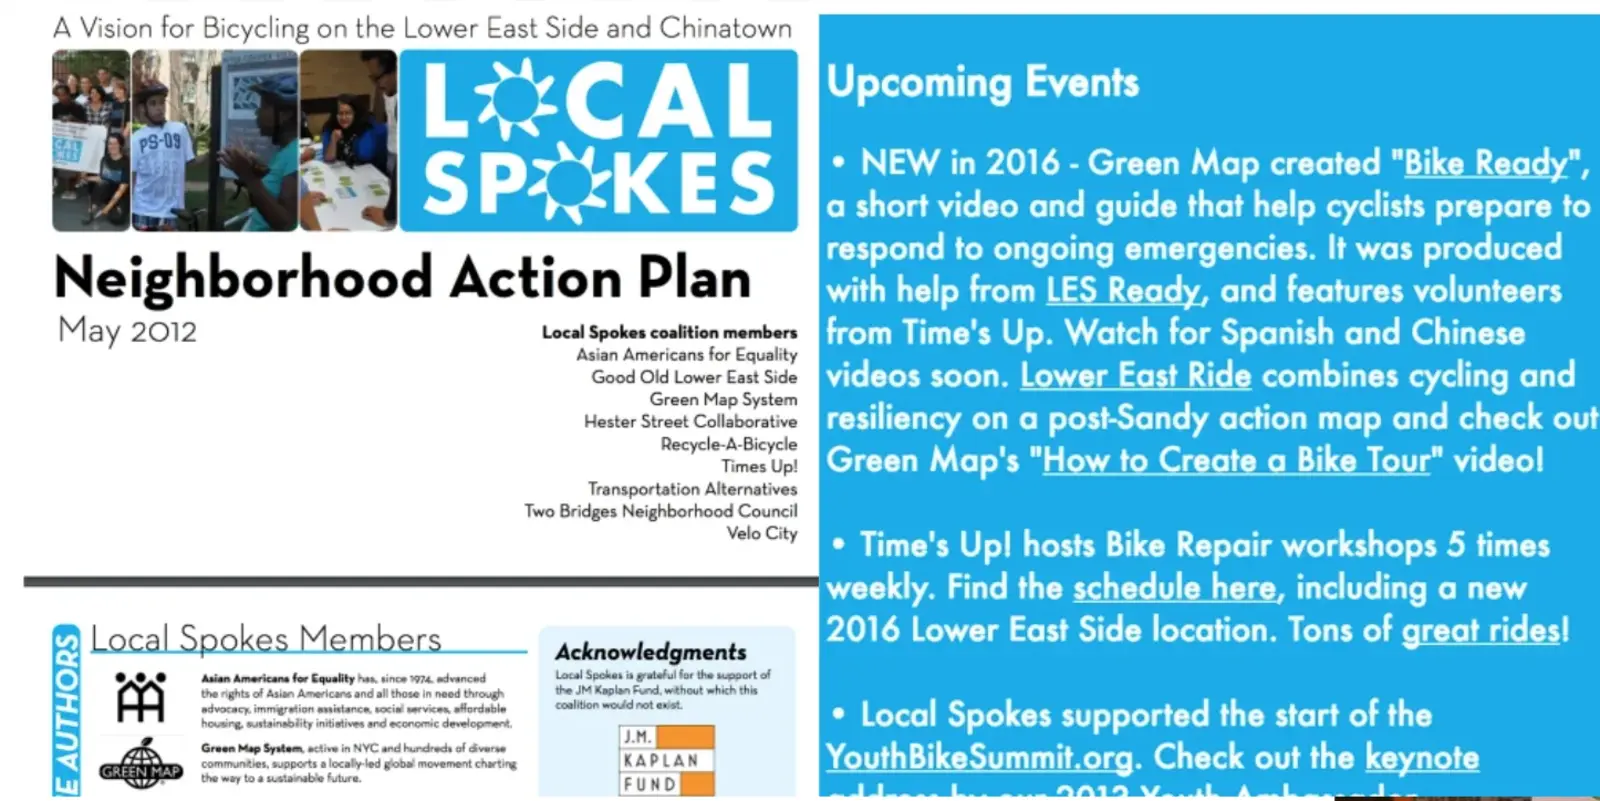 The Local Spokes Coalition contributed to the 'all age' appeal of cycling in the city